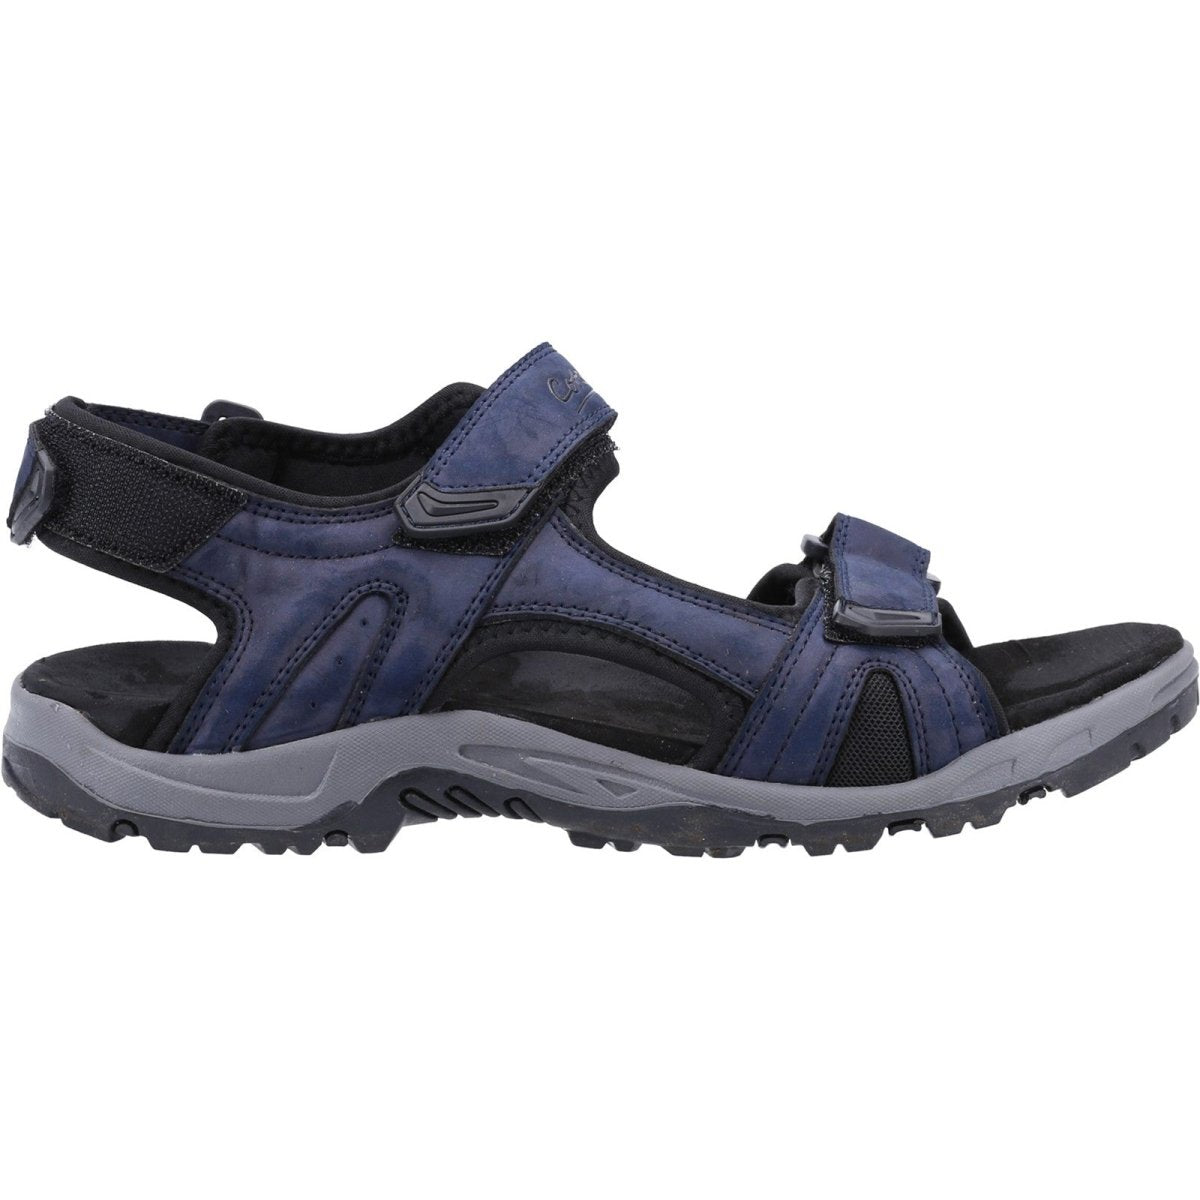 Cotswold Shilton Mens Summer Walking Recyled Sandals - Shoe Store Direct